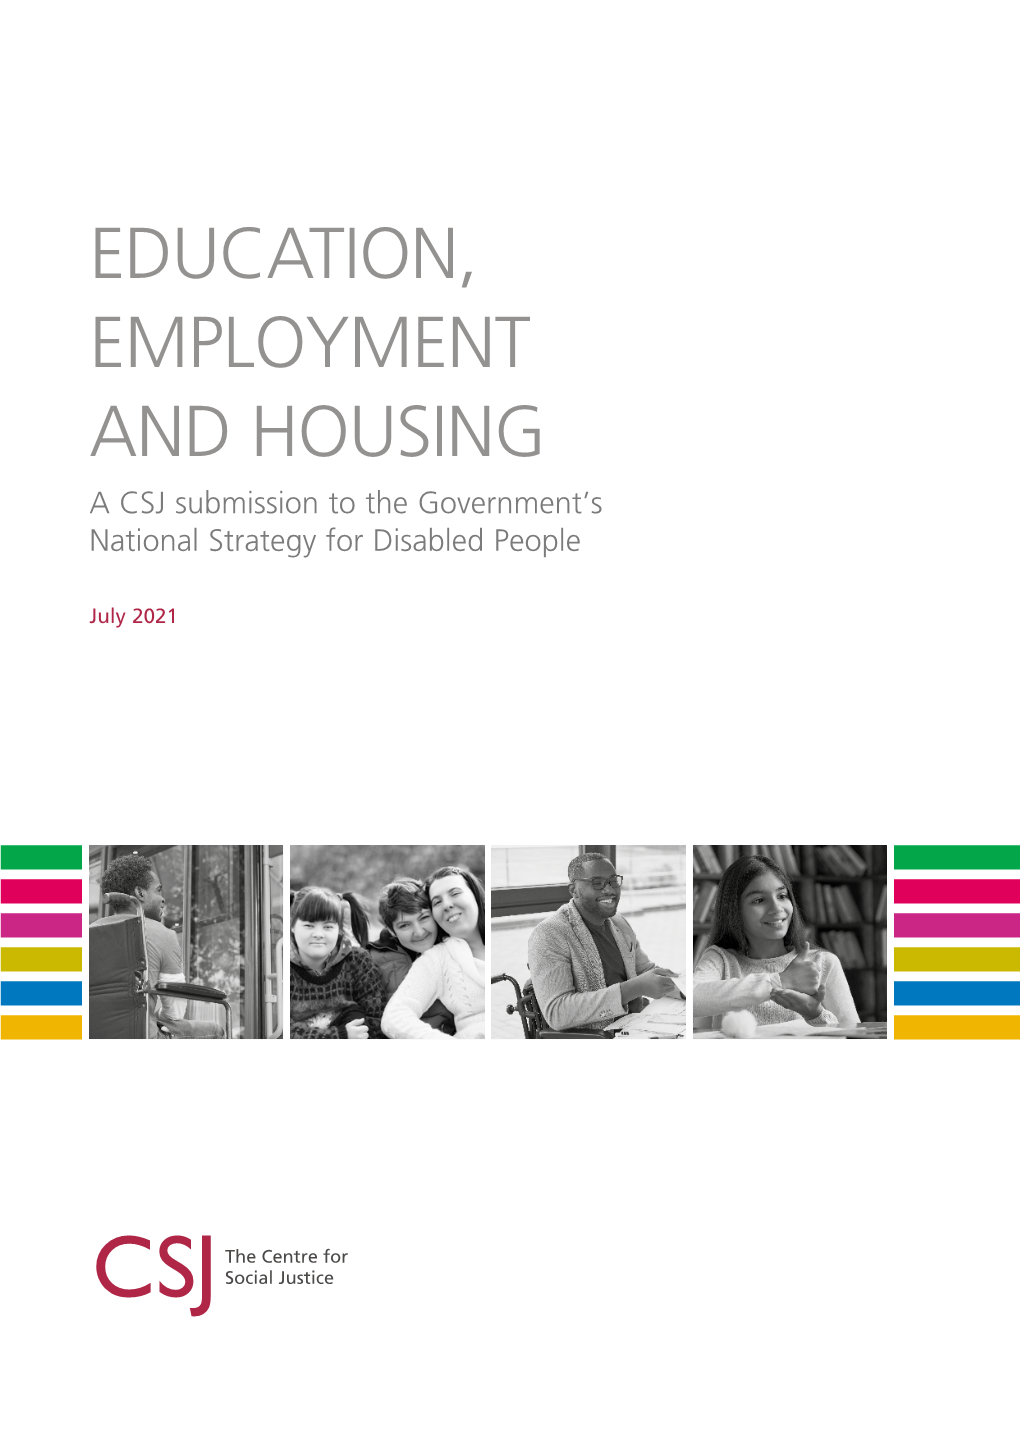 EDUCATION, EMPLOYMENT and HOUSING a CSJ Submission to the Government’S National Strategy for Disabled People